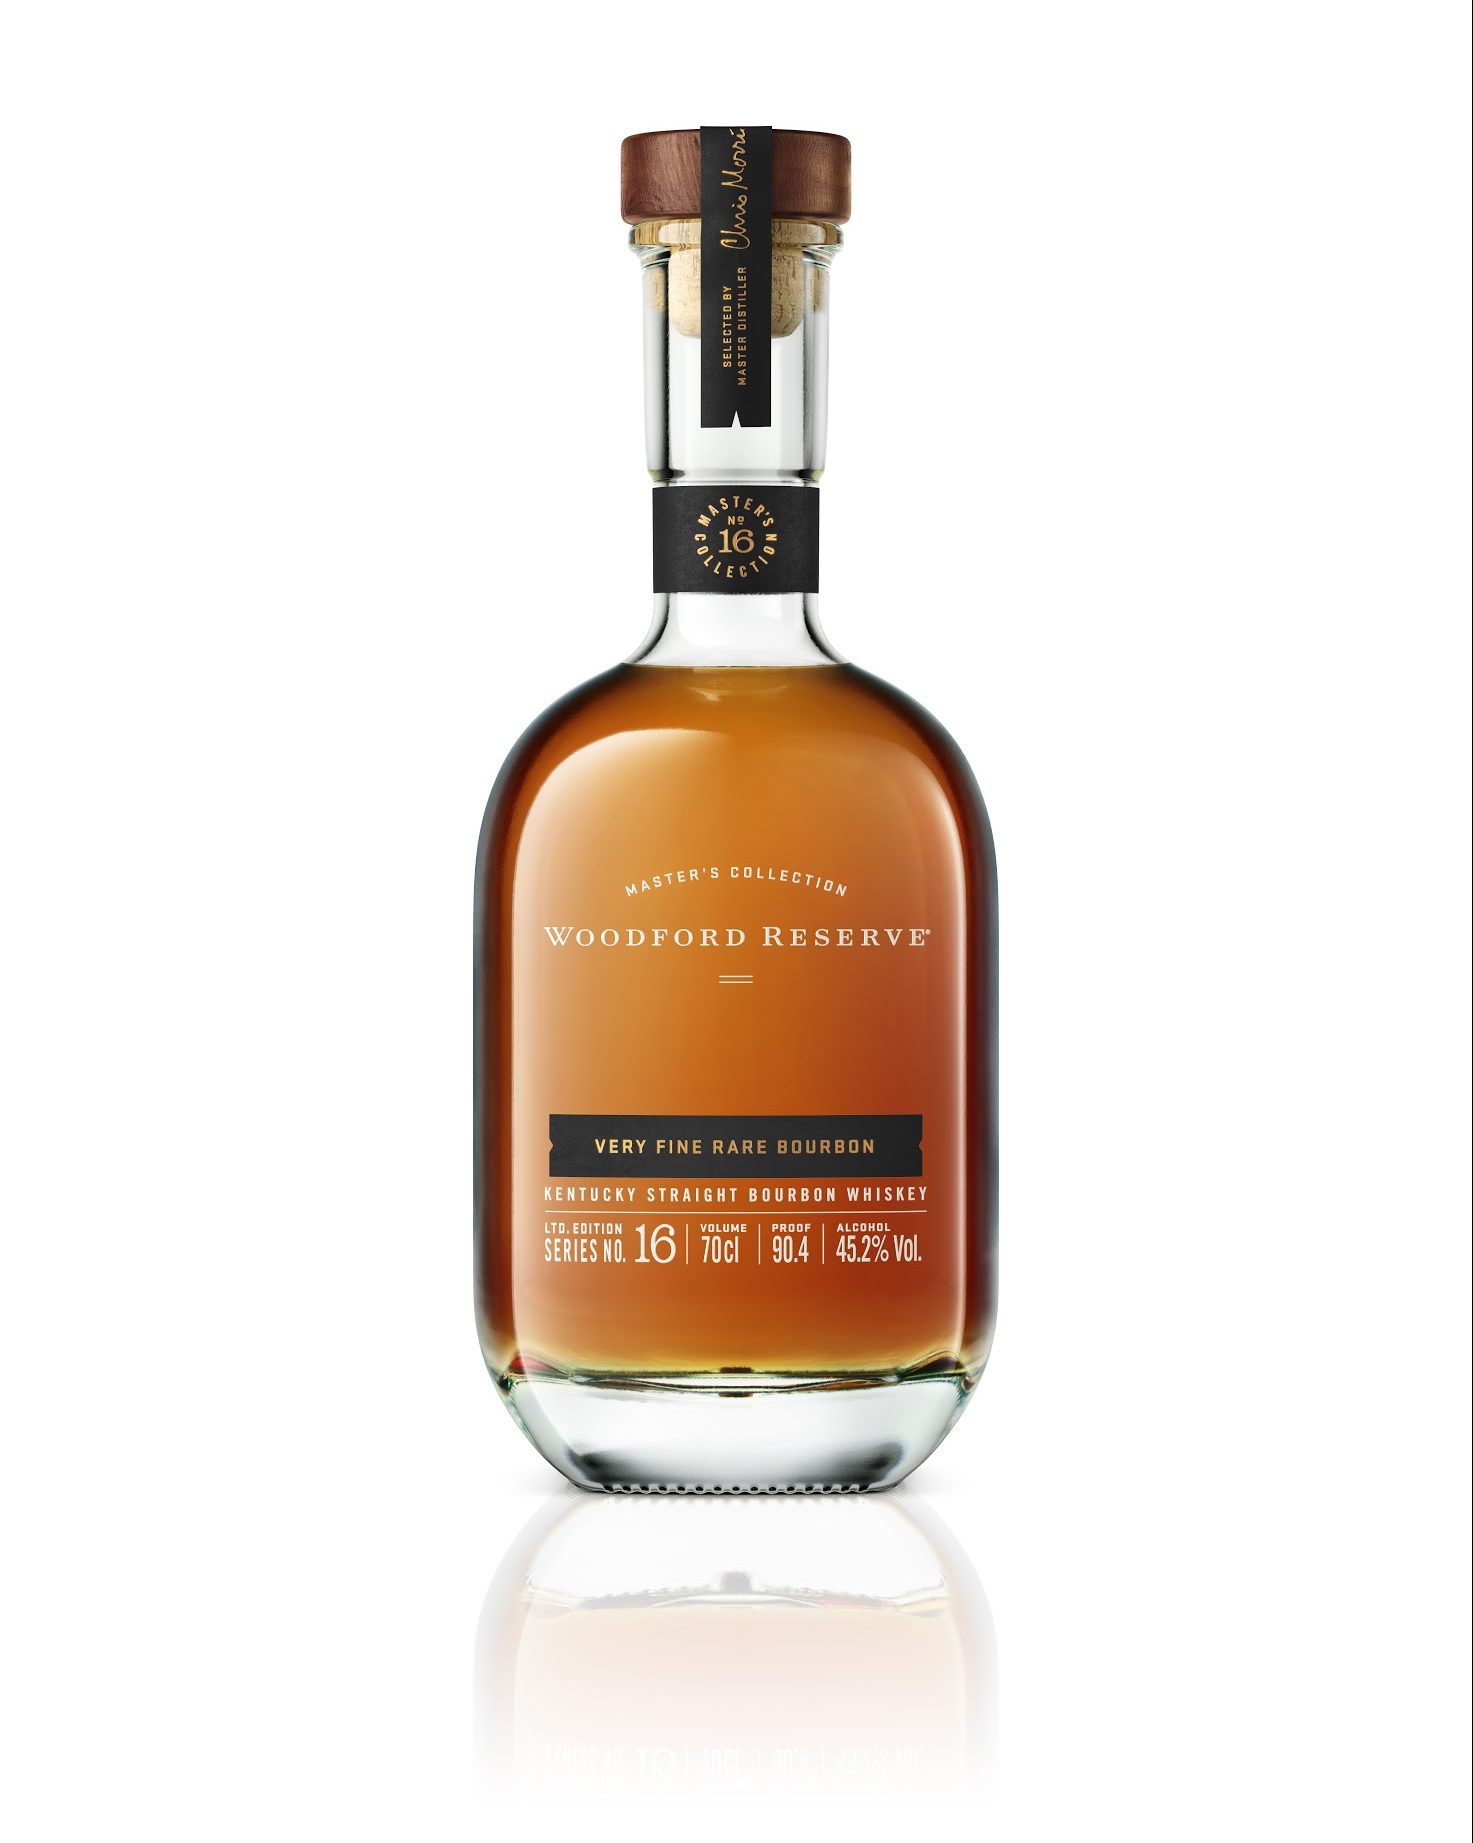 Woodford Reserve Master's Collection Very Fine Rare Bourbon 2020. Courtesy Woodford Reserve.